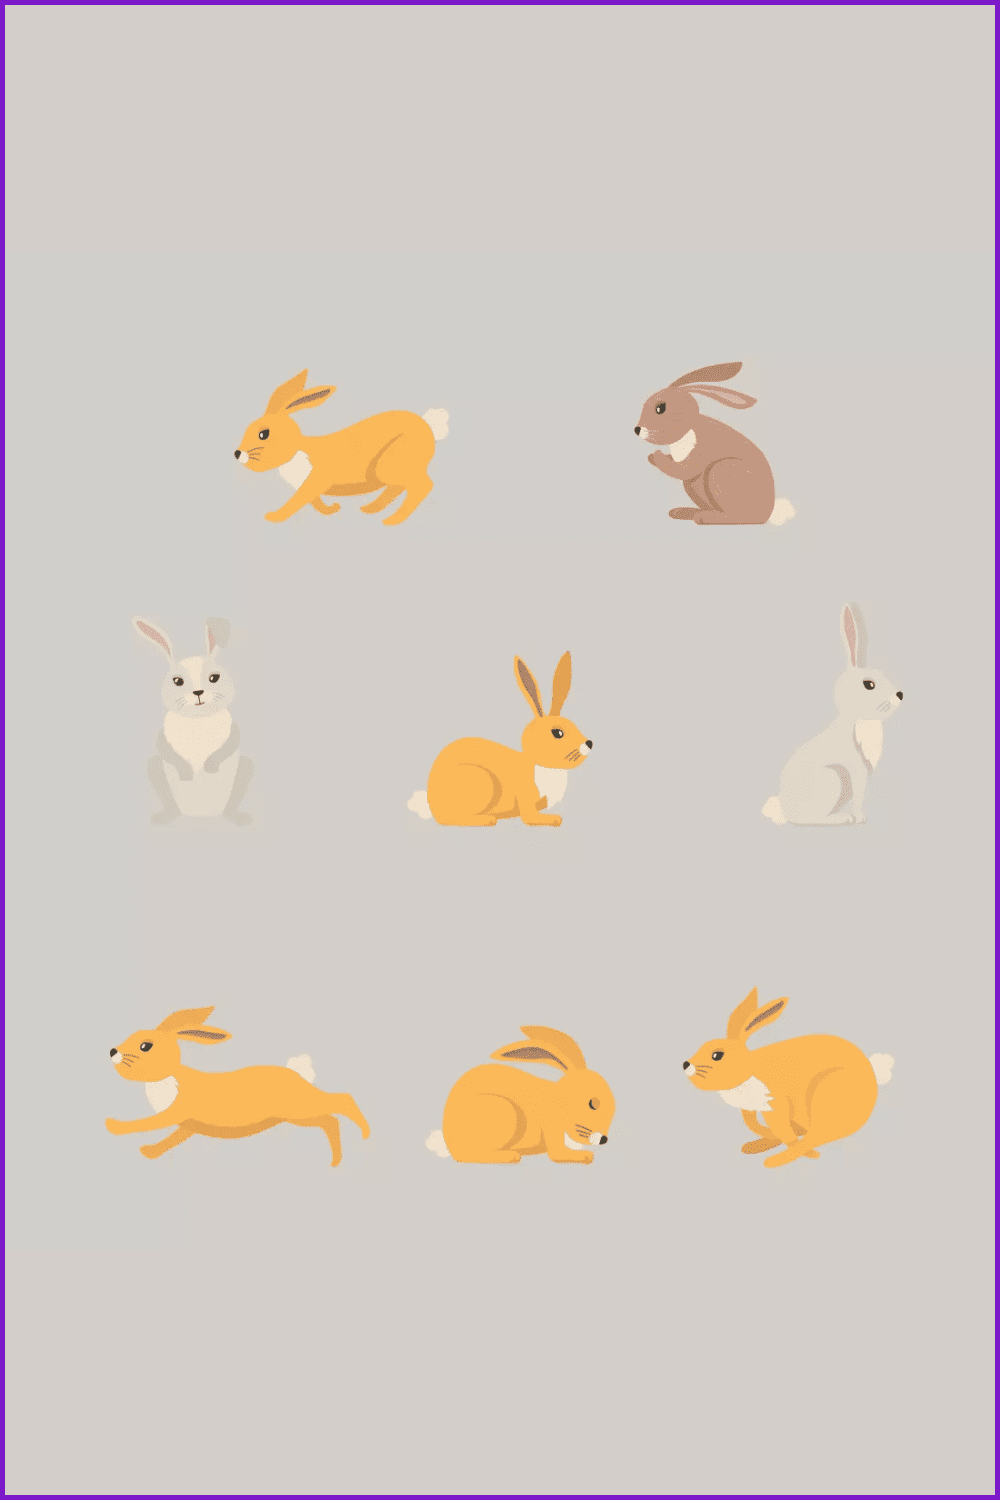 Cartoon bunnies in different colors and poses.